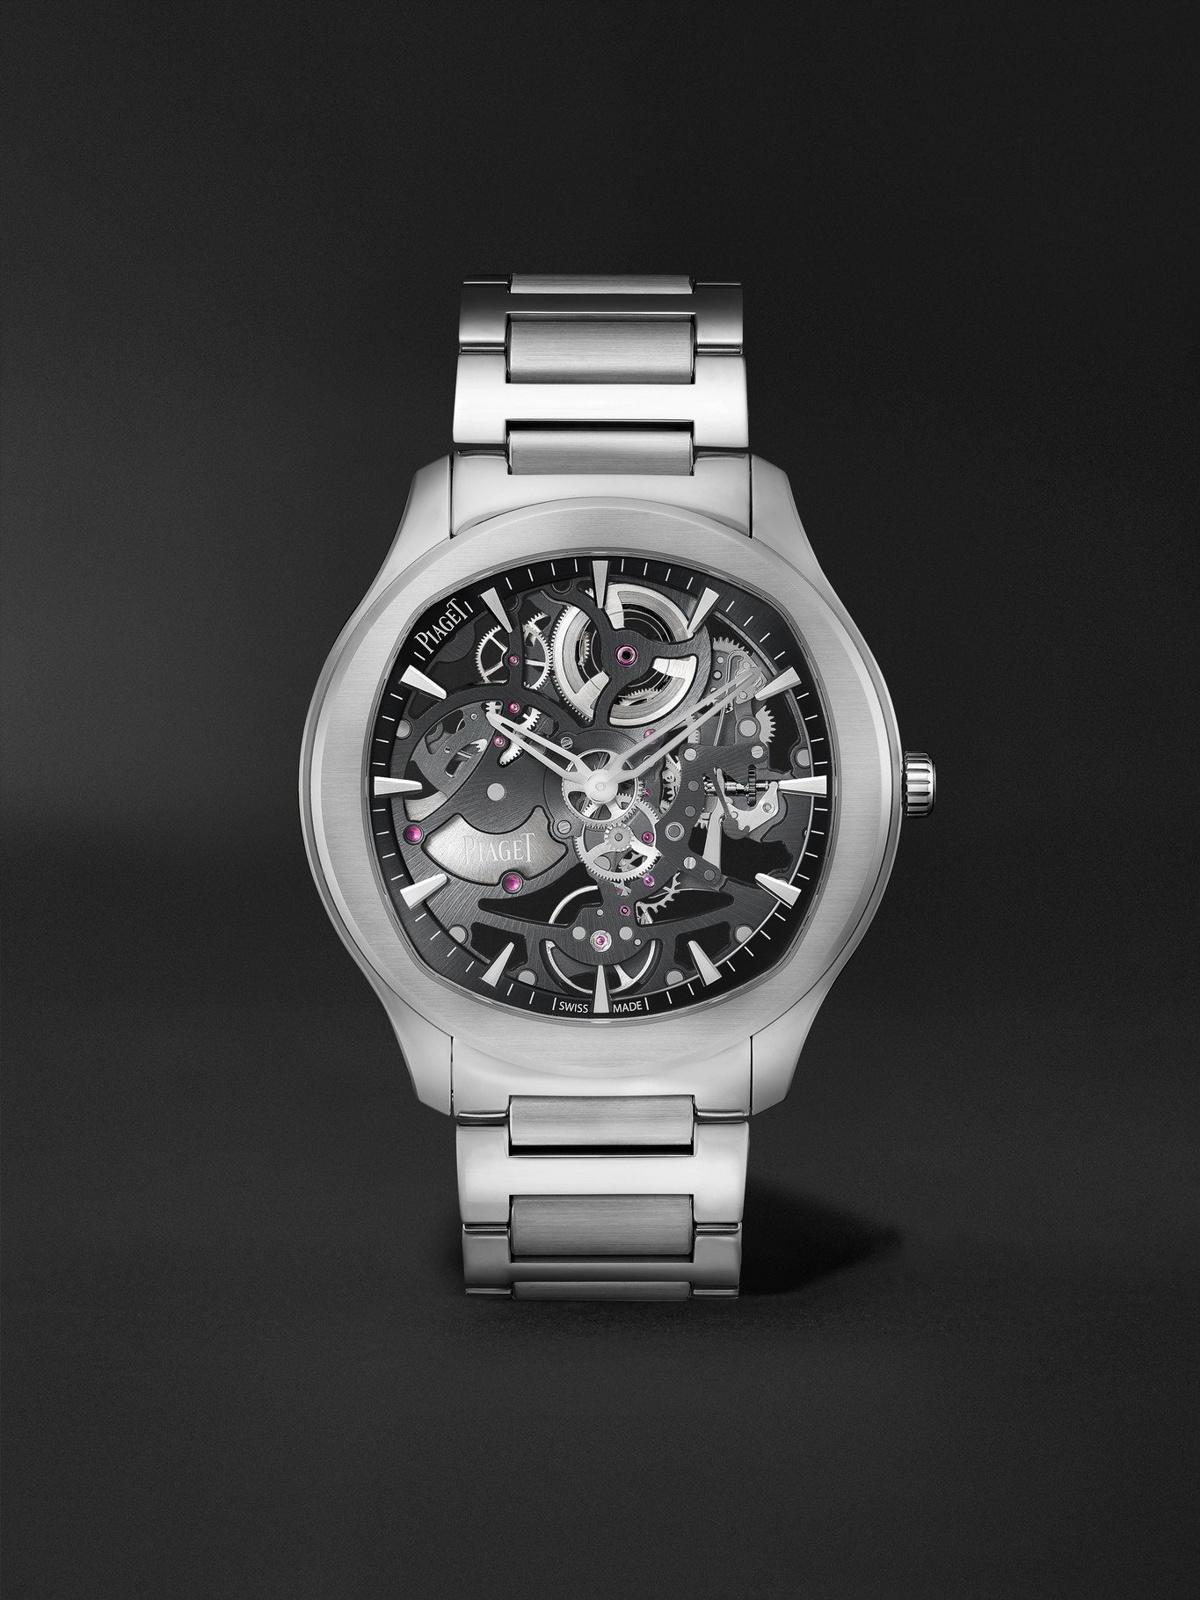 Photo: PIAGET - Polo Skeleton Automatic 42mm Stainless Steel Watch, Ref. No. G0A45001 - Gray